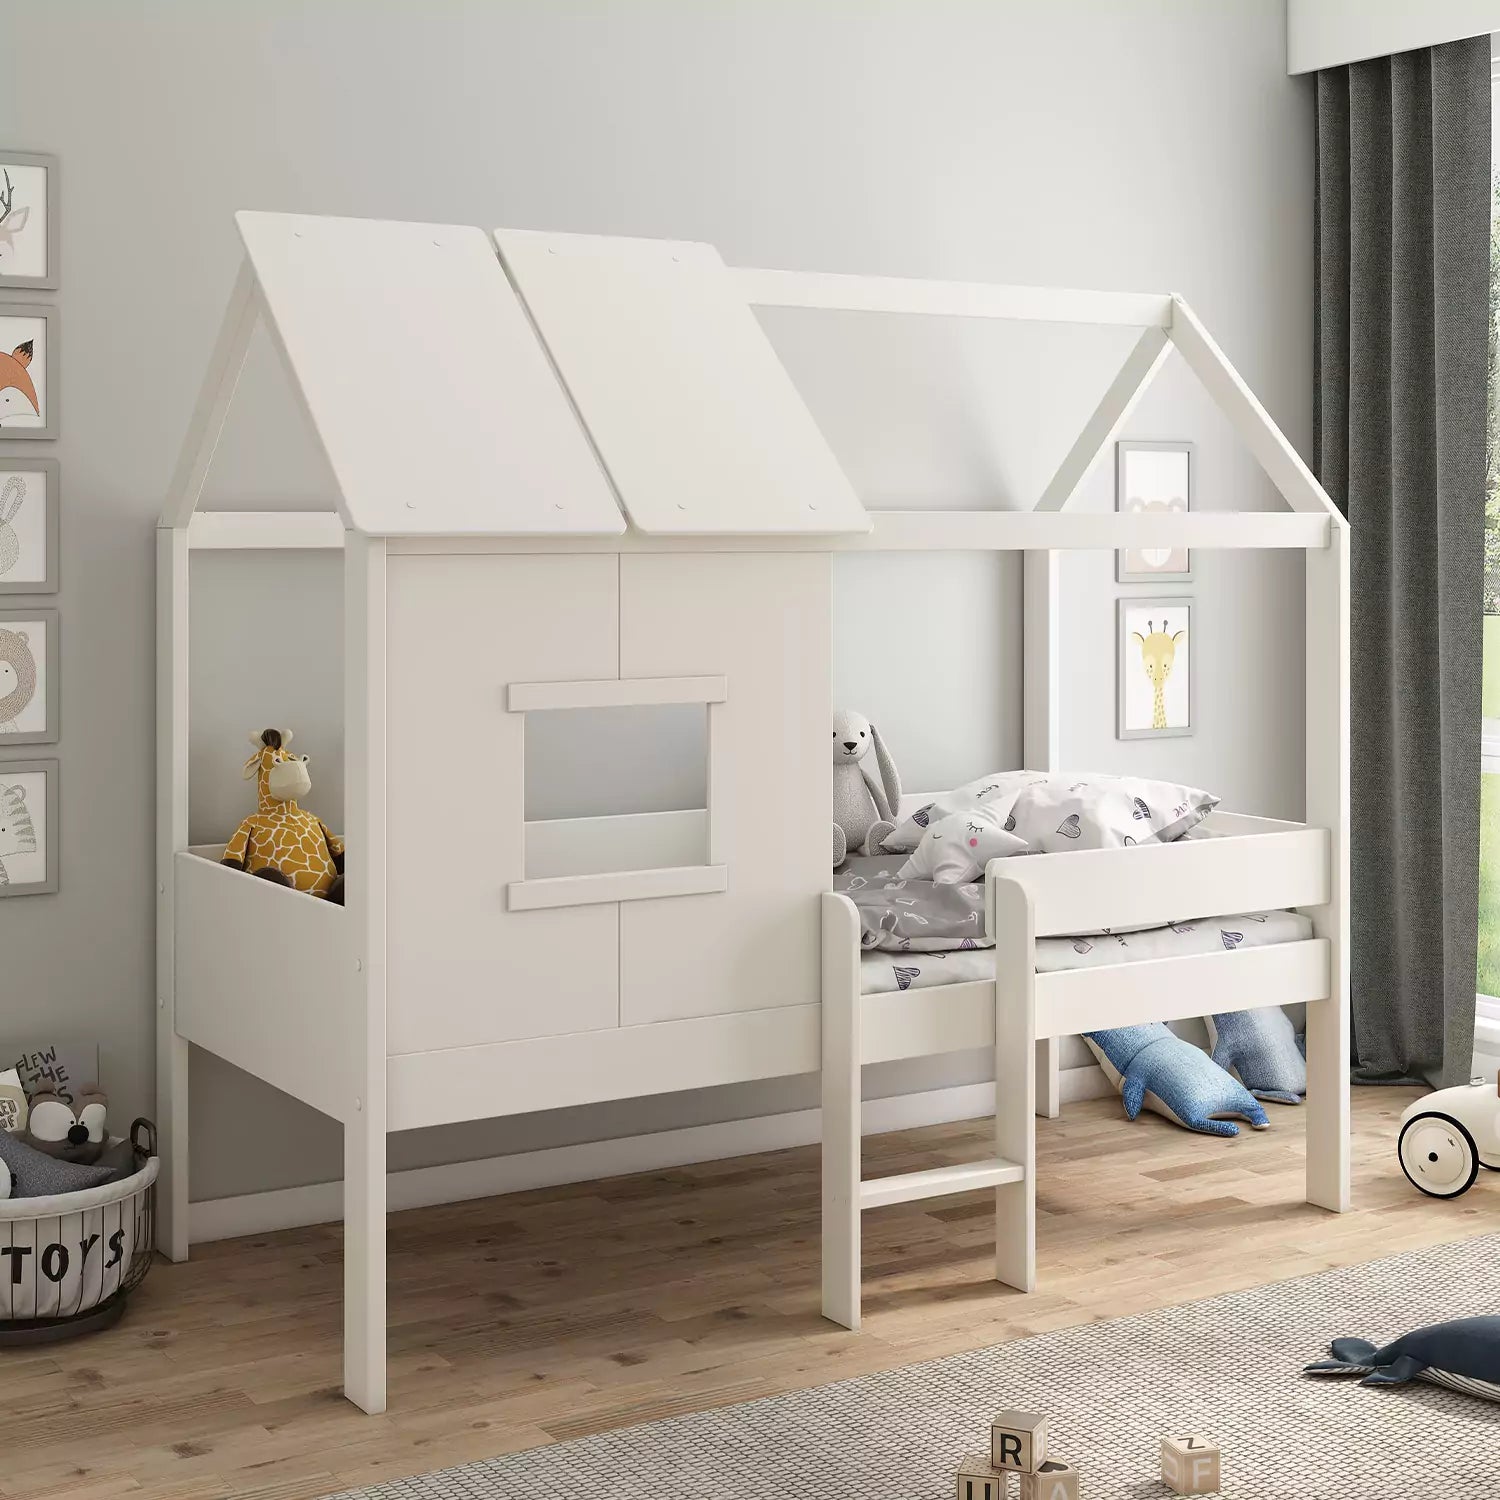 An image of Buy Ordi 1 Mini Playhouse Daybed (White) - SmallSmart UK